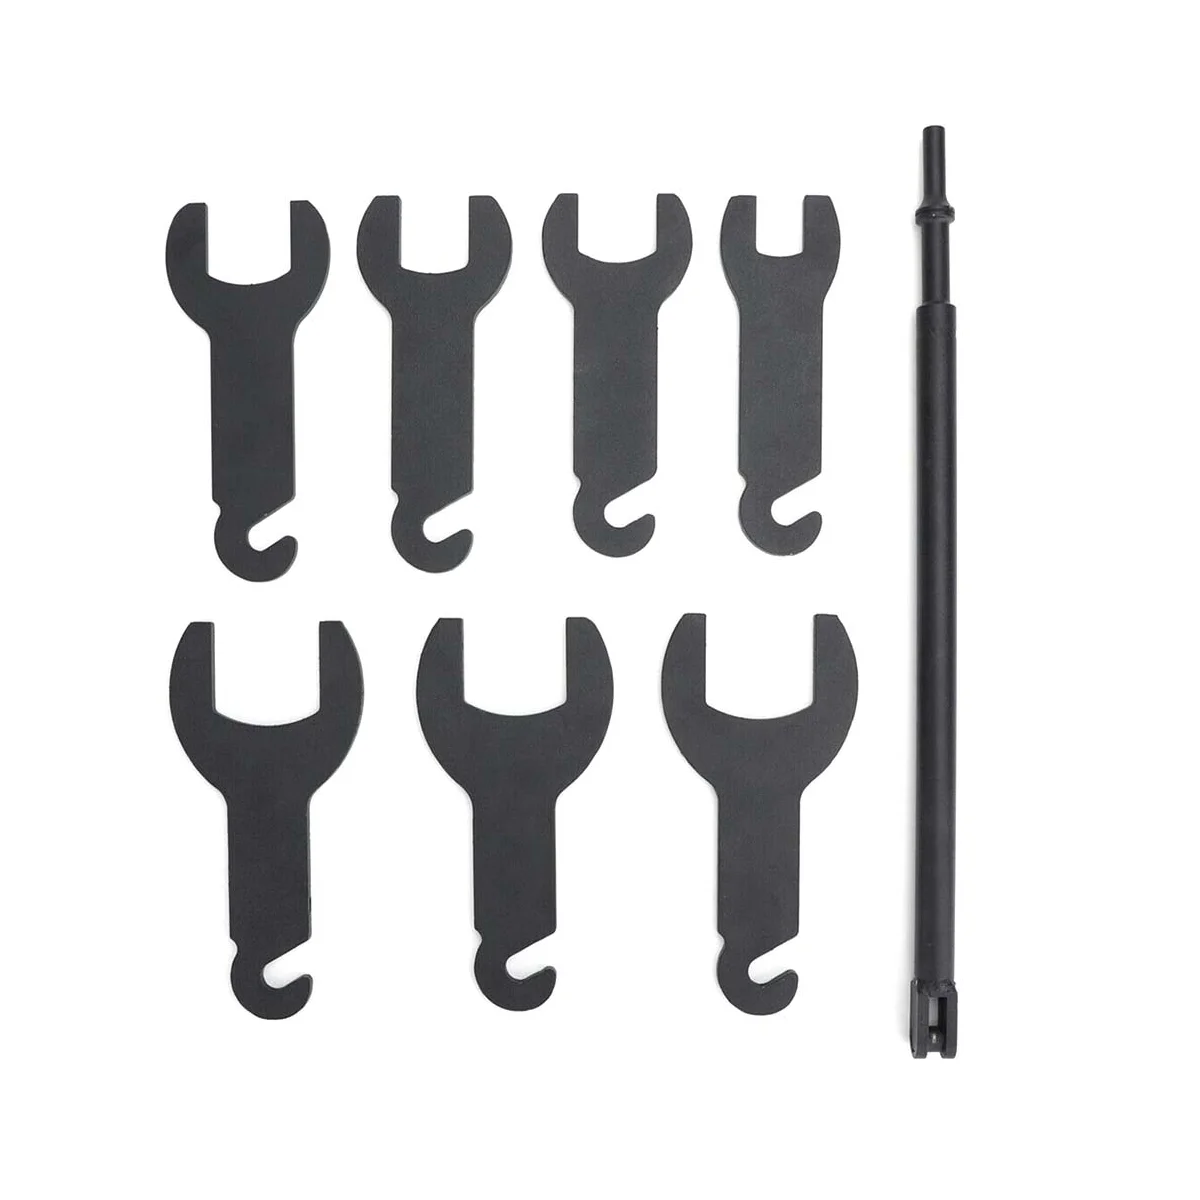 

43300 Pneumatic Fan Clutch Wrench Set Removal Tool Kit for Ford GM Chrysler Gear Assisted Positioning